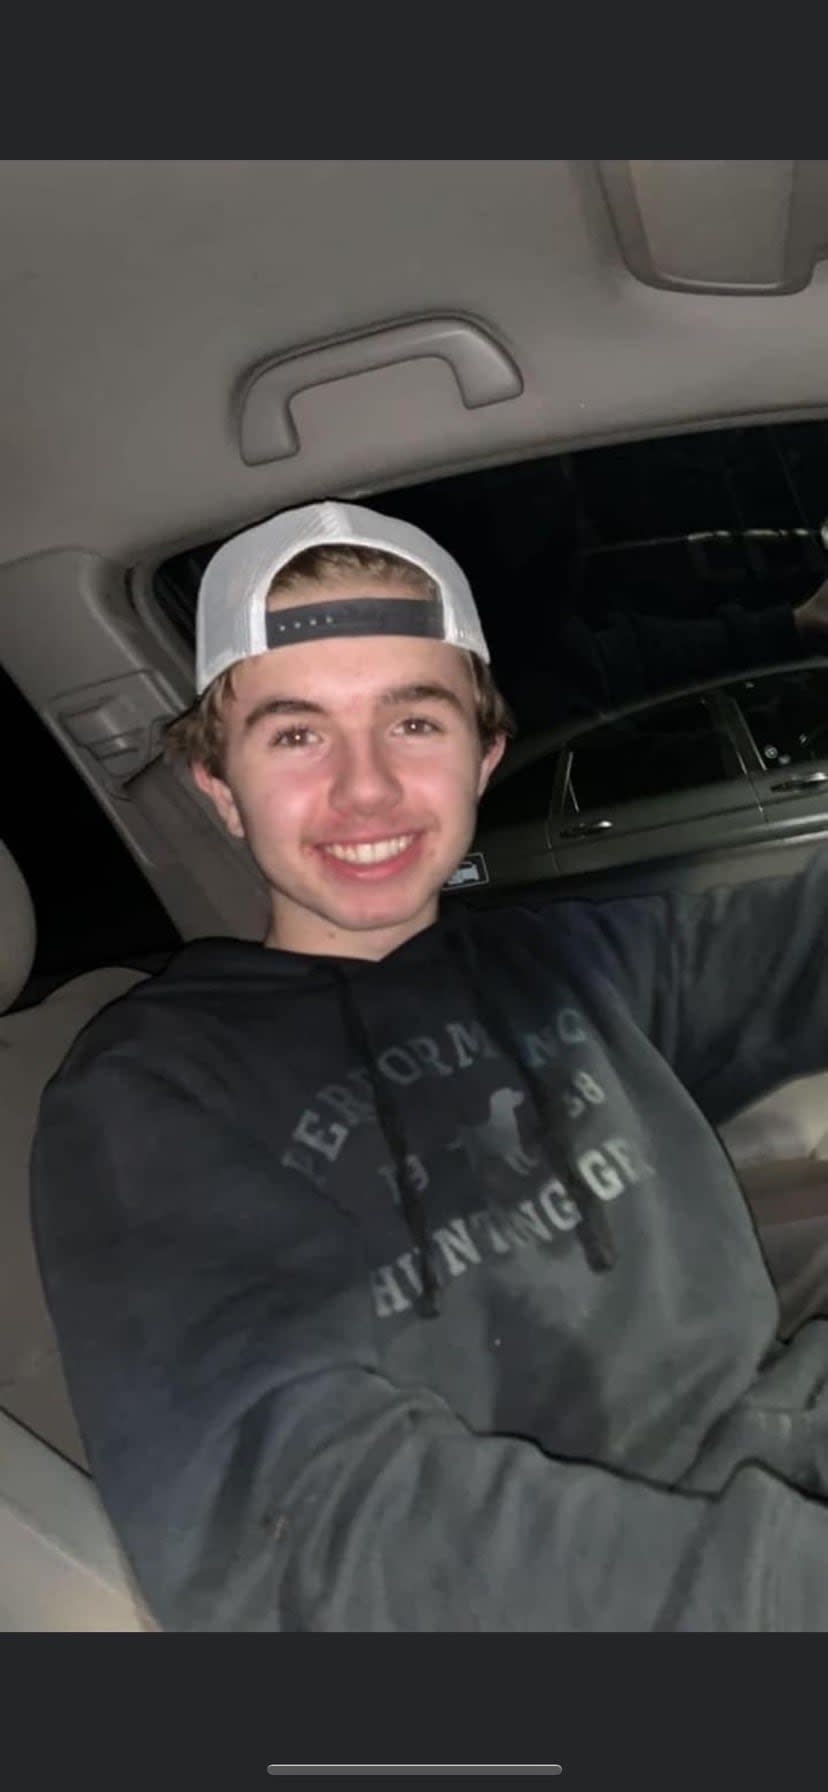 Tyson MacDonald's family is speaking out to thank the community for its support after the 17-year-old's disappearance on Dec. 14. Charges of first-degree murder have been laid against two young people.  (Submitted - image credit)